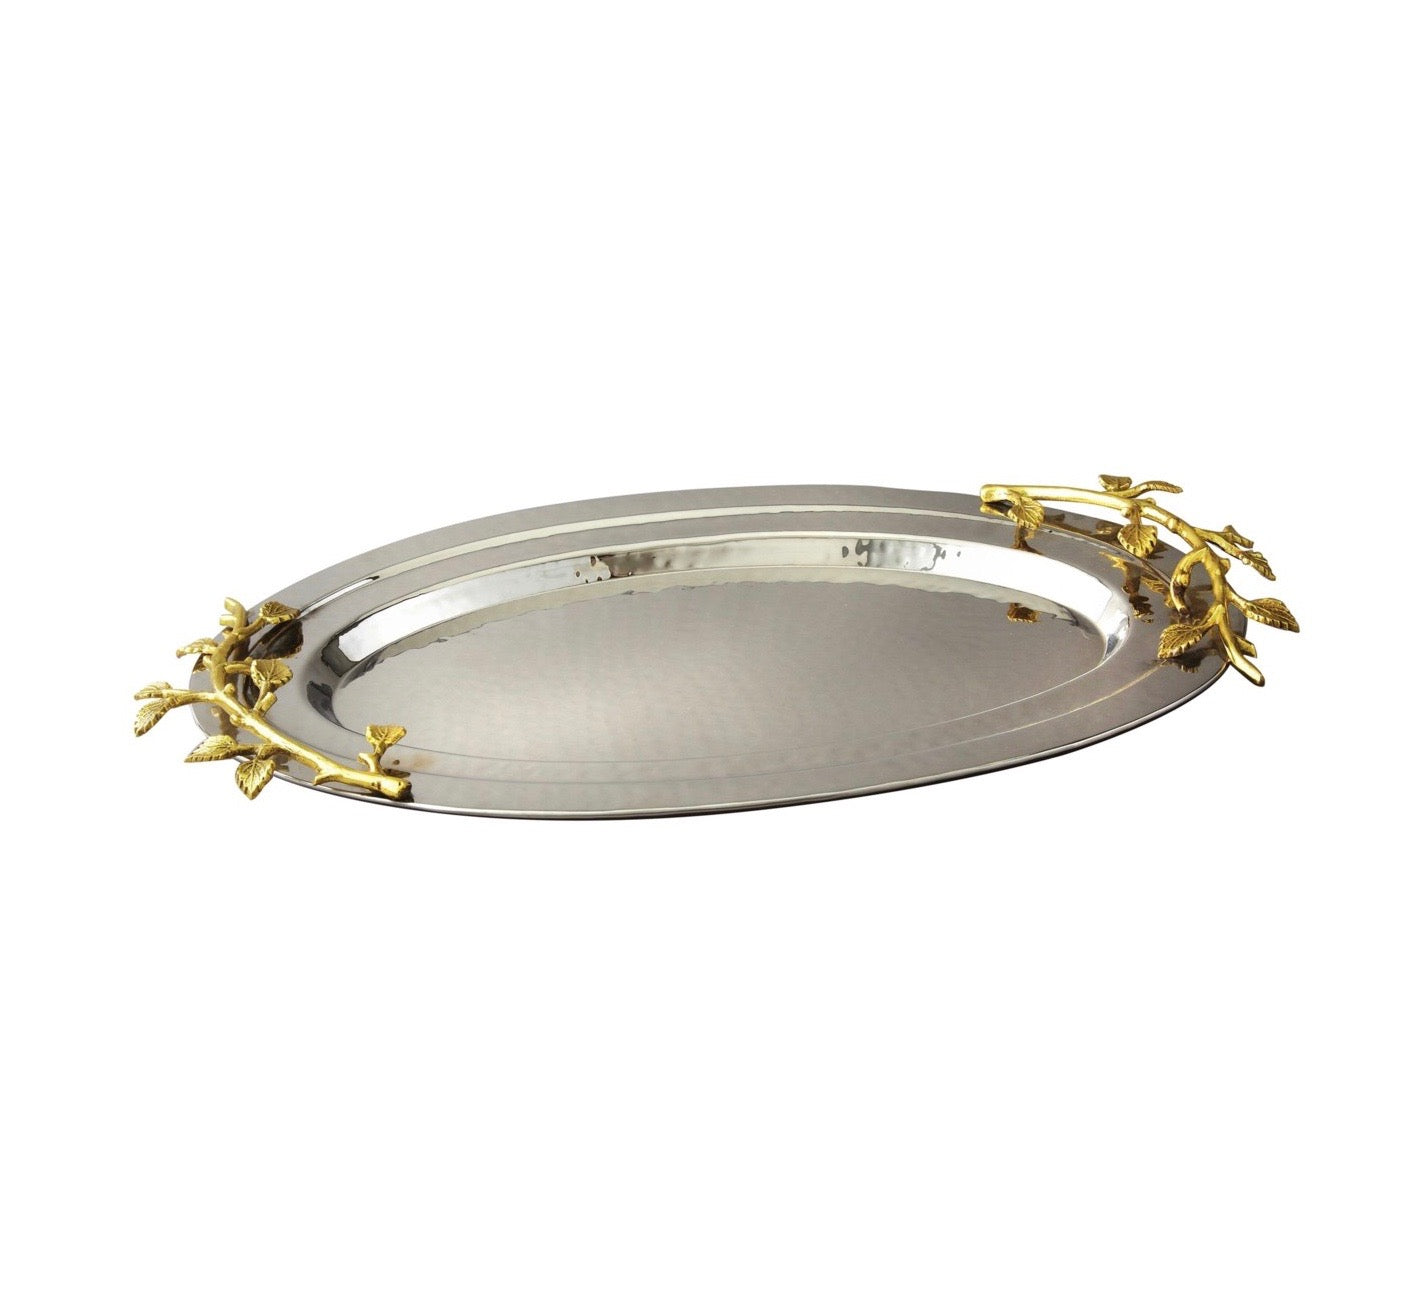 Silver and Gold Oval Hammered Tray